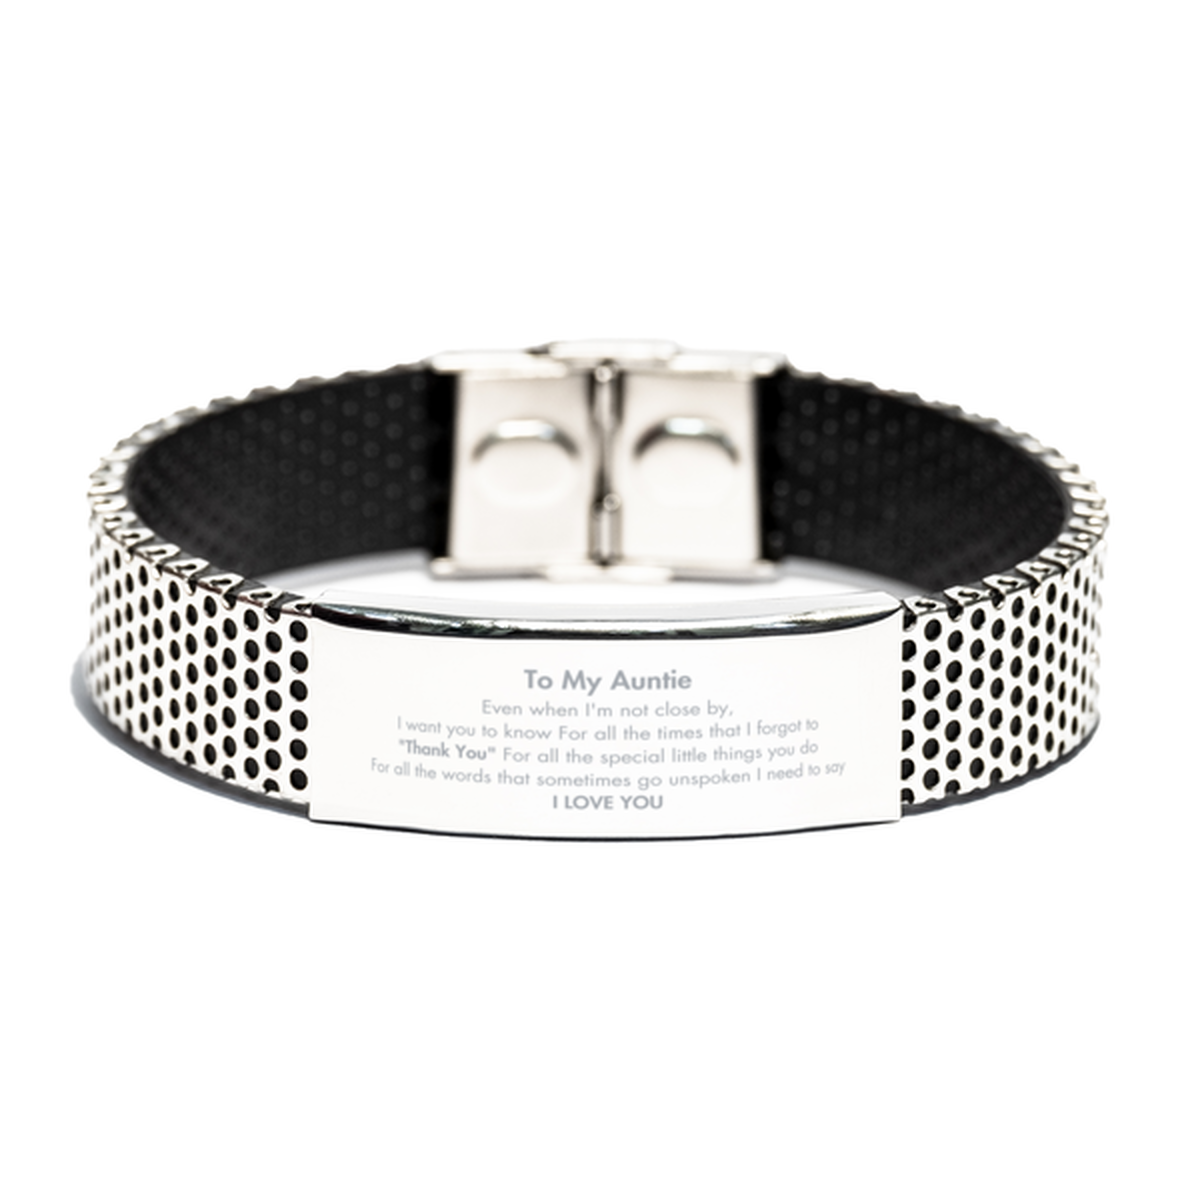 Thank You Gifts for Auntie, Keepsake Stainless Steel Bracelet Gifts for Auntie Birthday Mother's day Father's Day Auntie For all the words That sometimes go unspoken I need to say I LOVE YOU